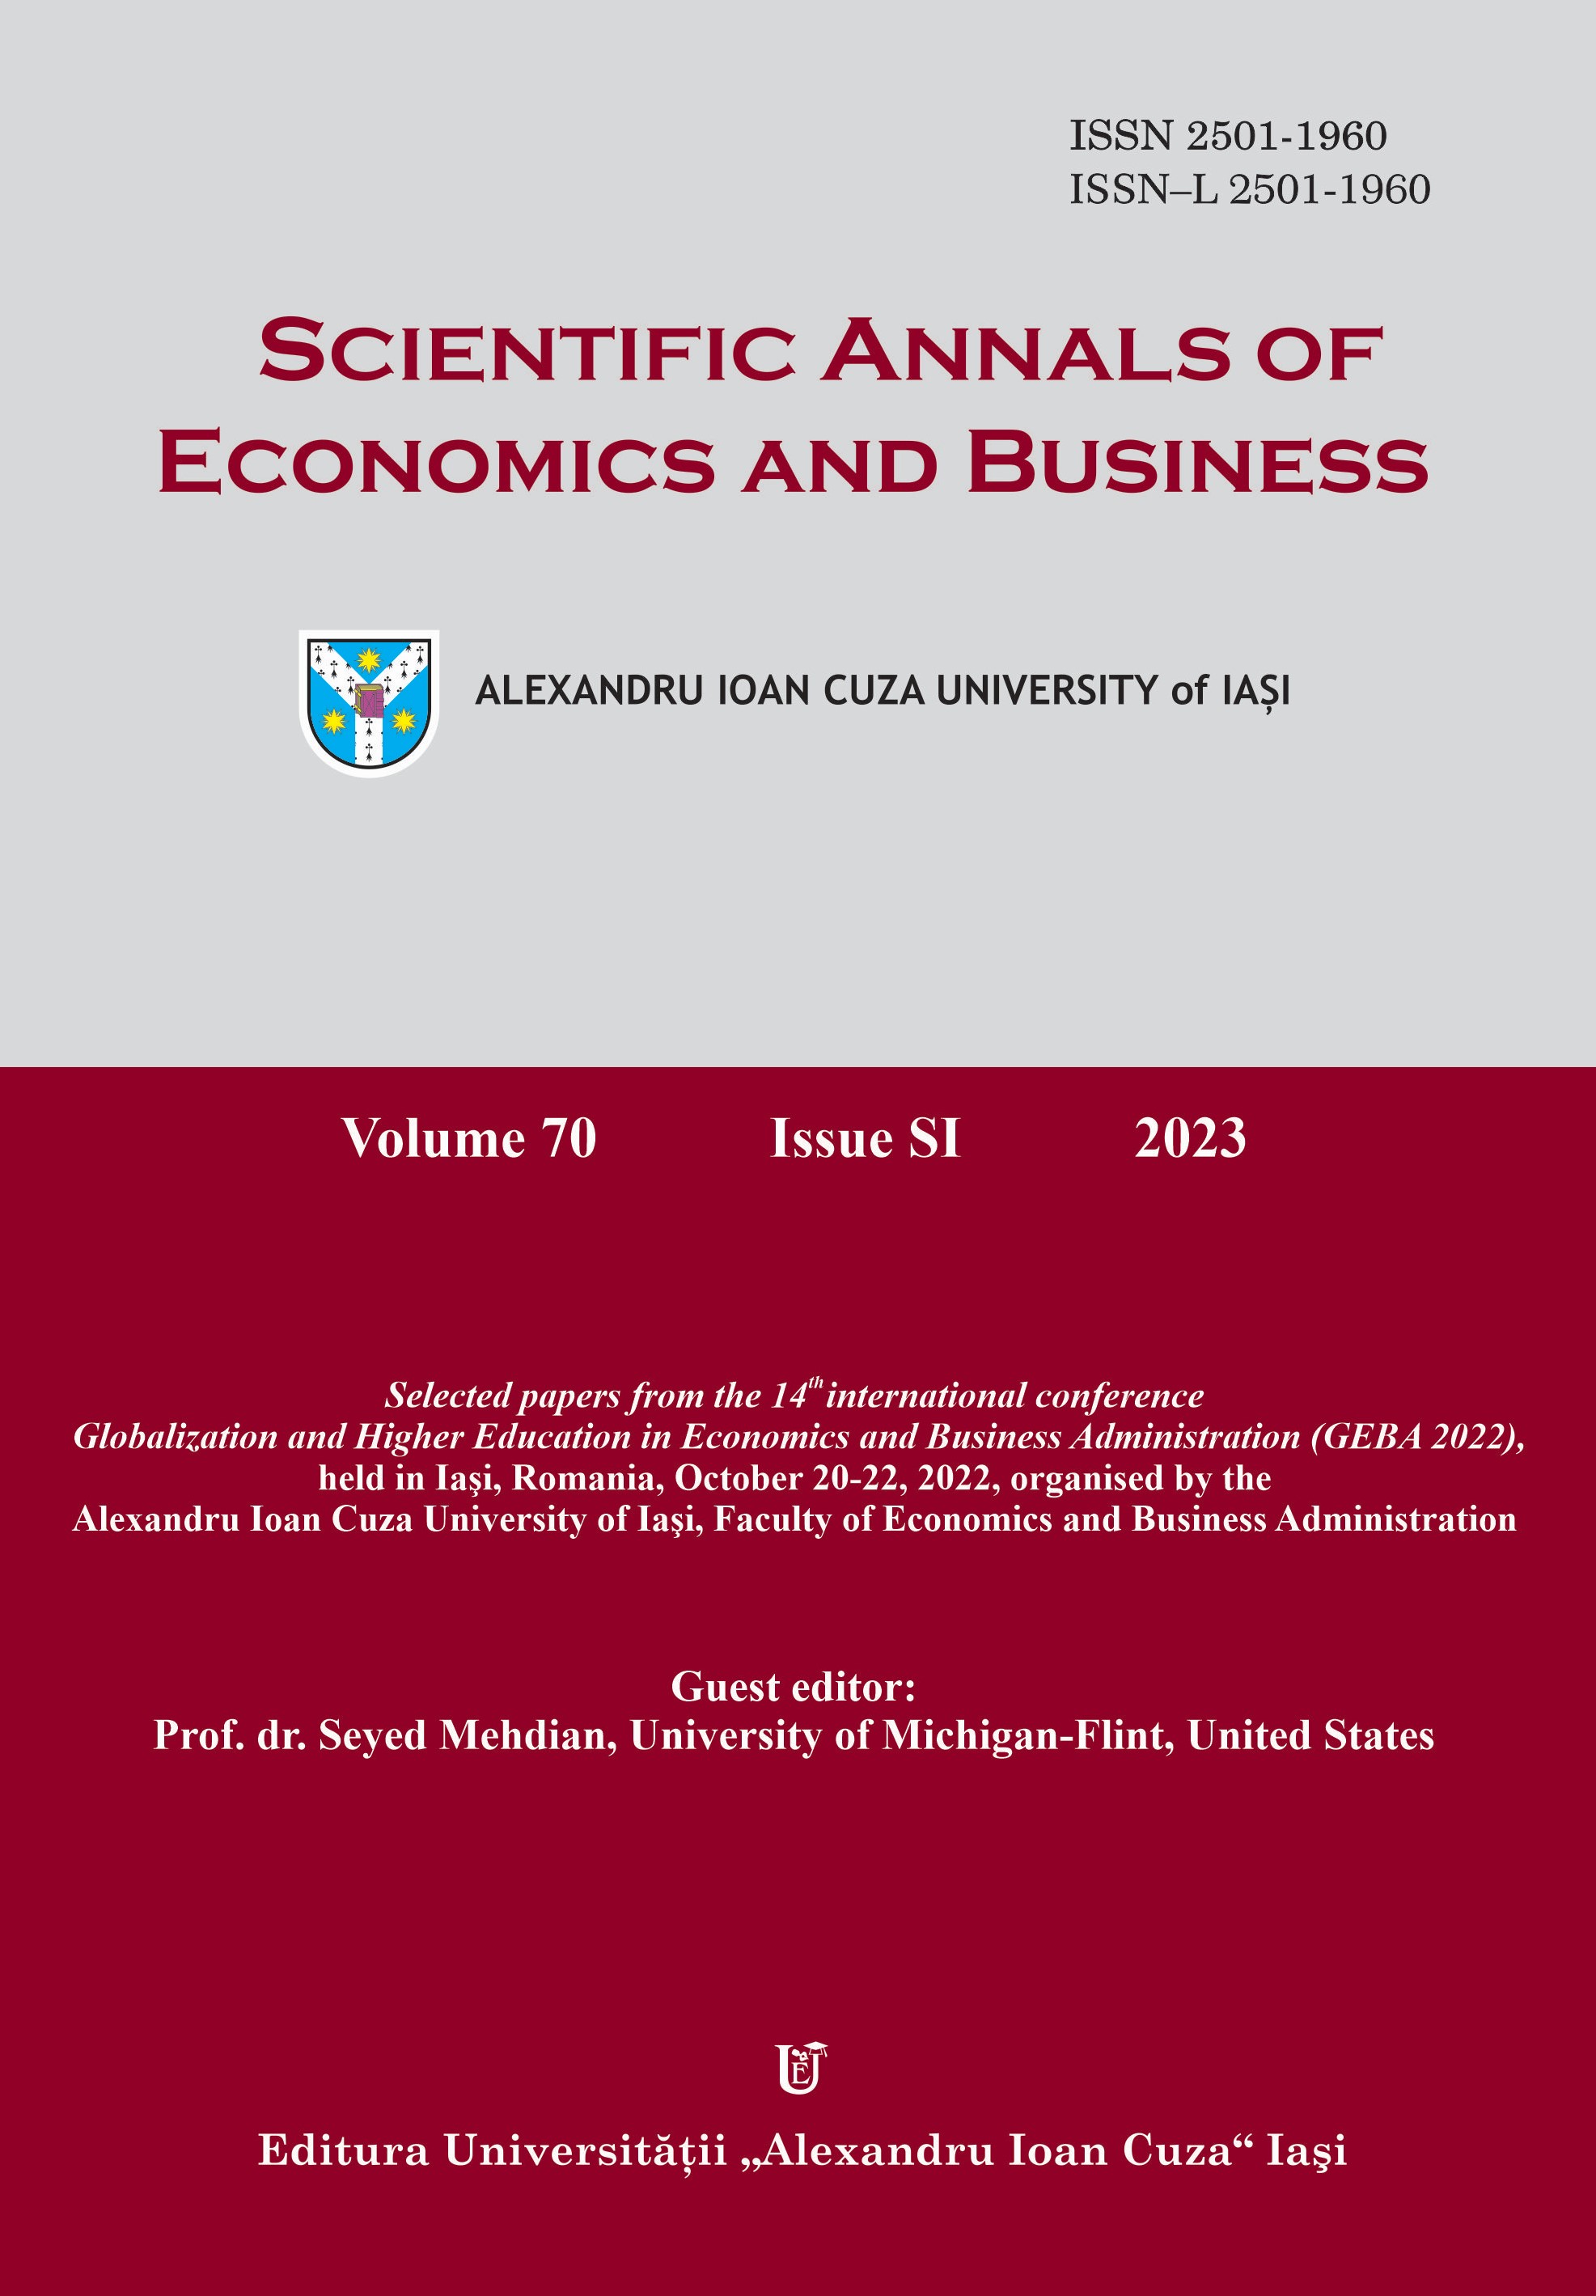 The Impact of Business Intelligence and Analytics Adoption on Decision Making Effectiveness and Managerial Work Performance